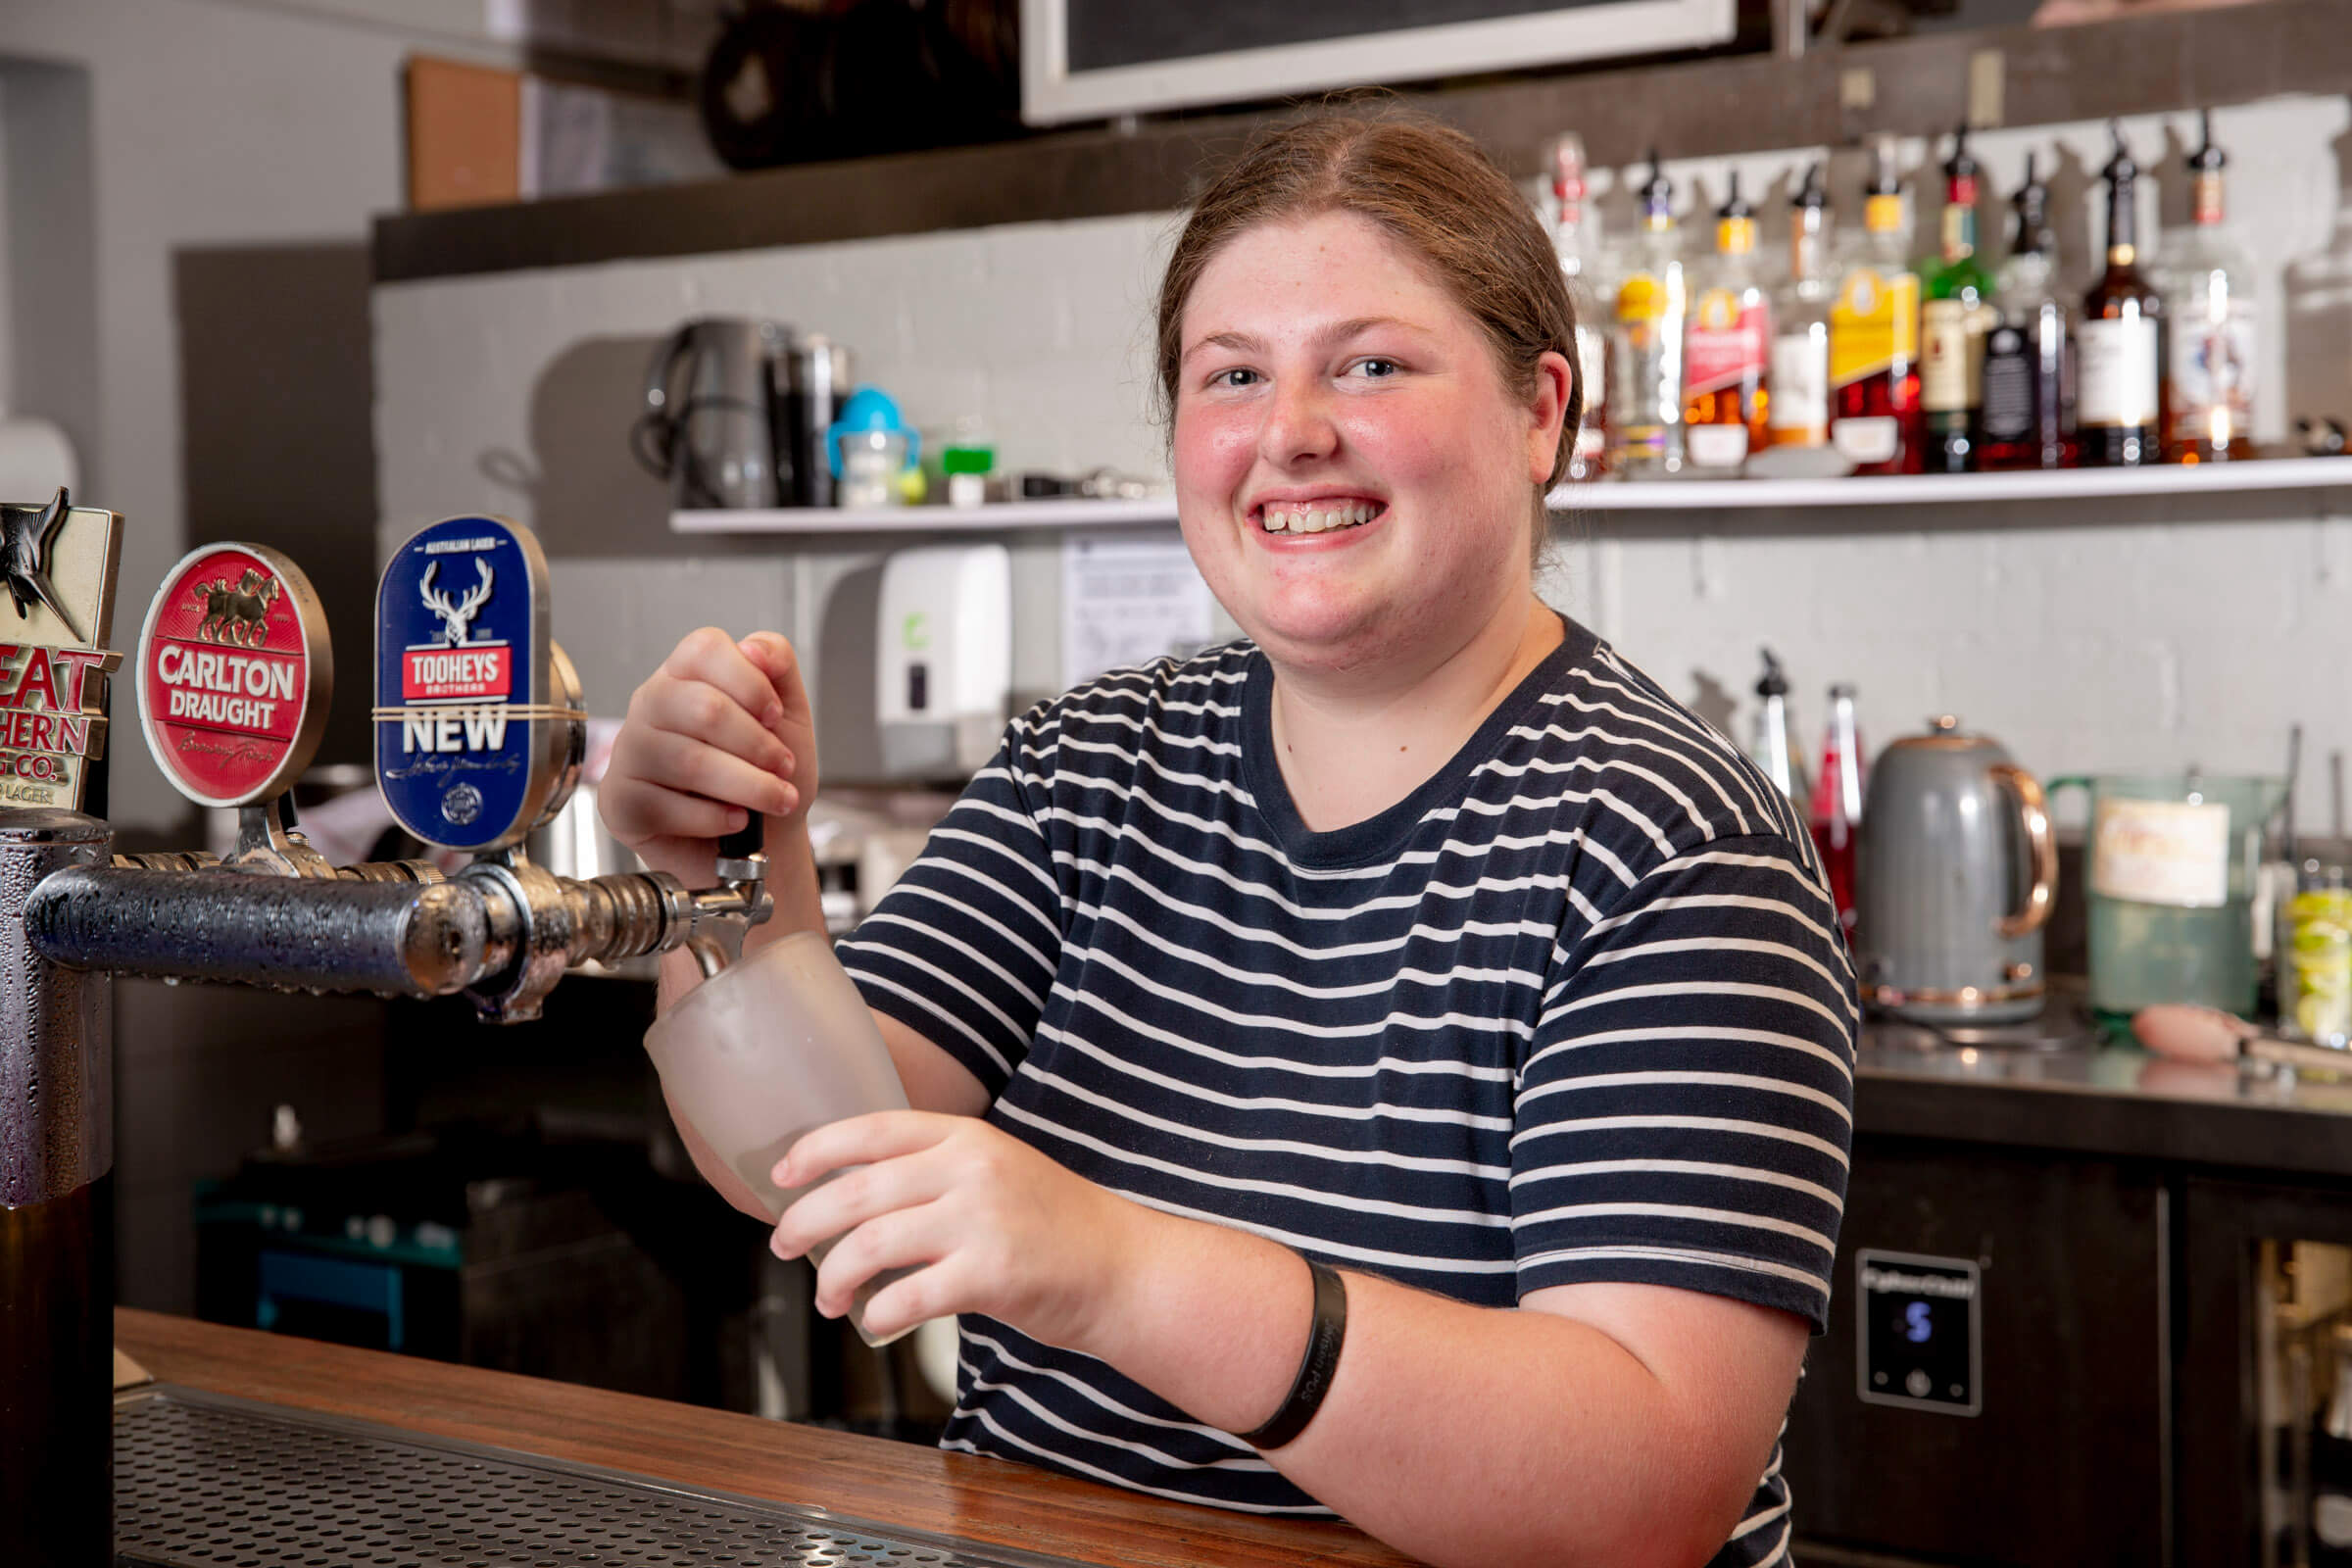 Young girl smiling pouring drinks at the bar